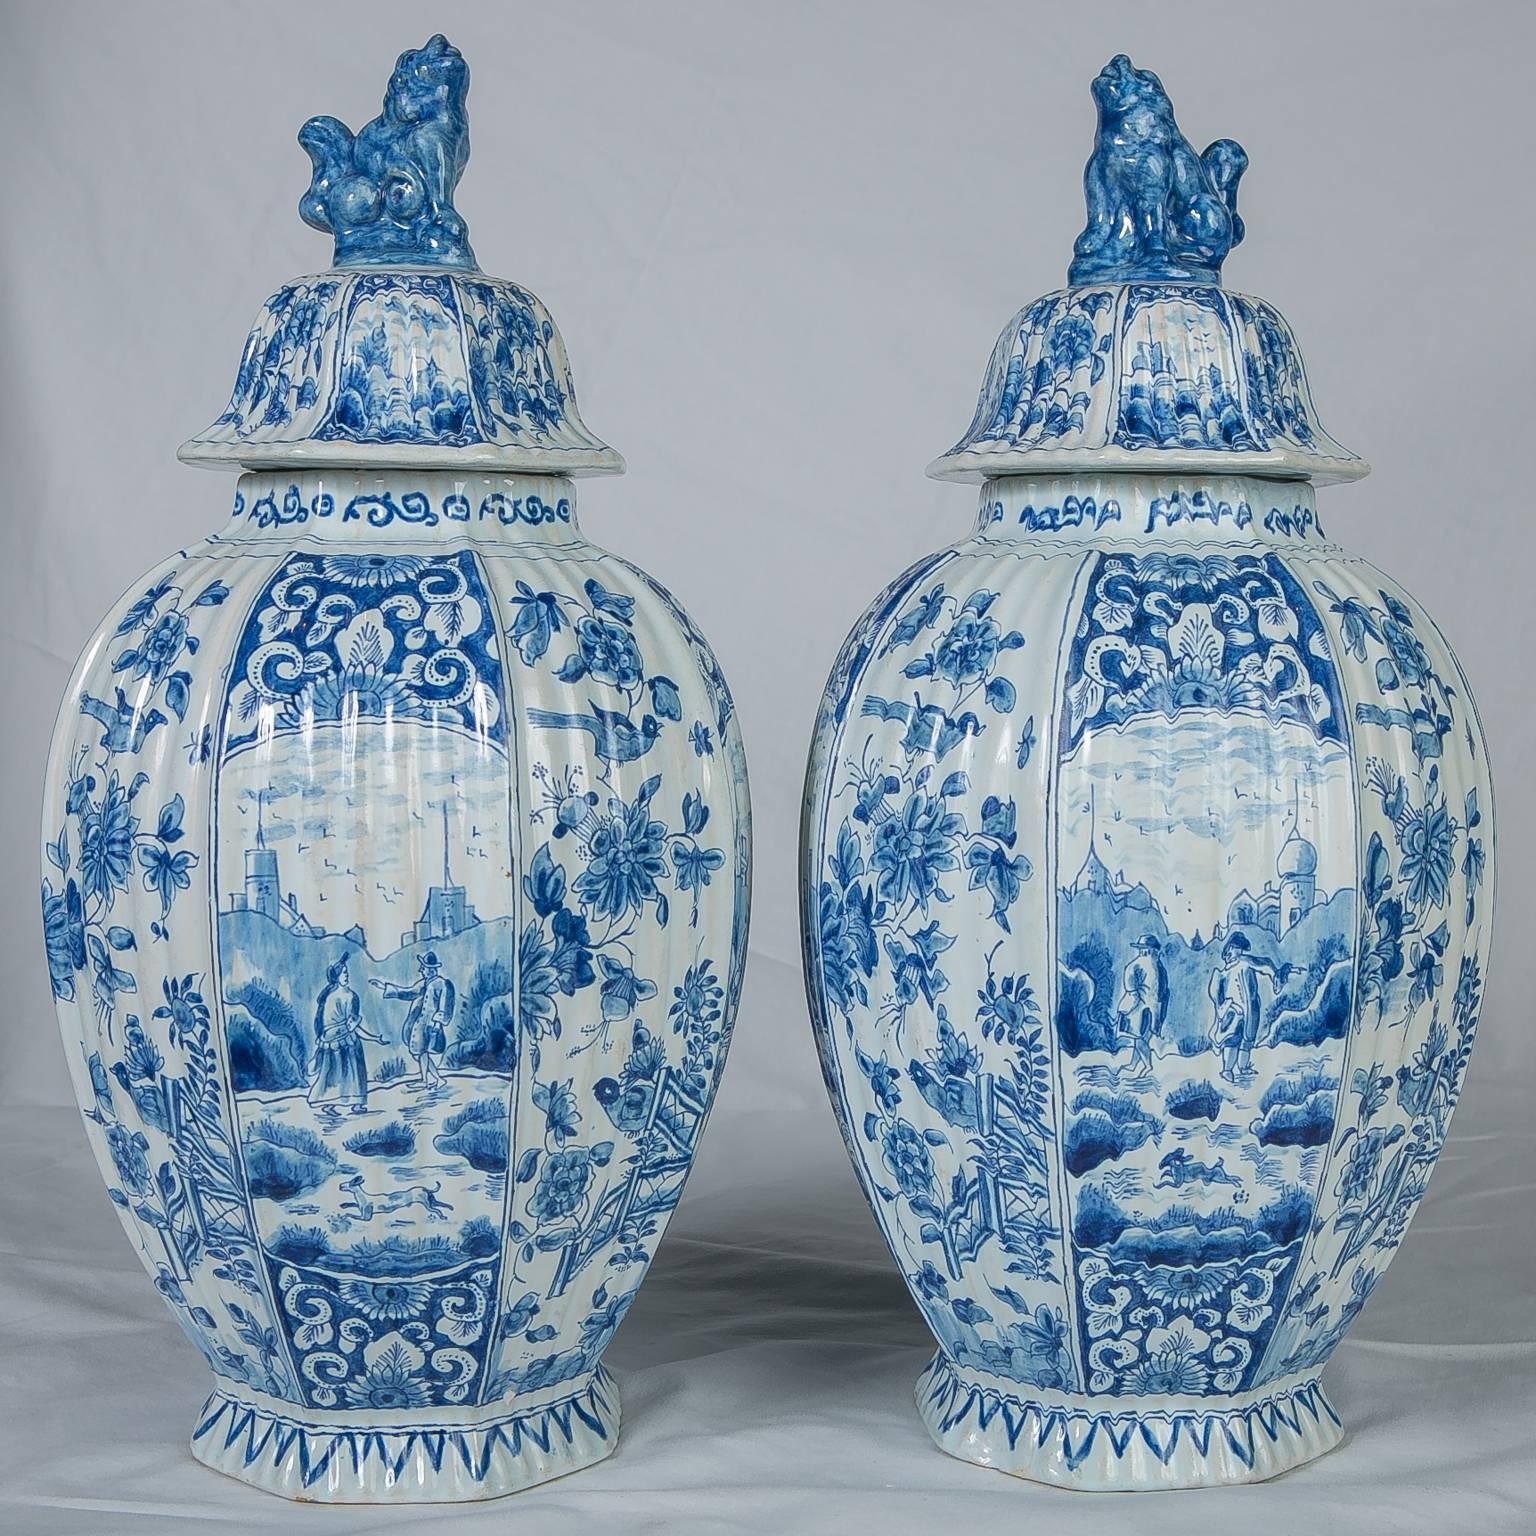 A lovely pair of Dutch delft covered jars with ribbed panels painted in a soft blue with garden scenes and song birds.
Each vase is topped by a foo lion finial (foo lions were traditional protectors of the home).
 